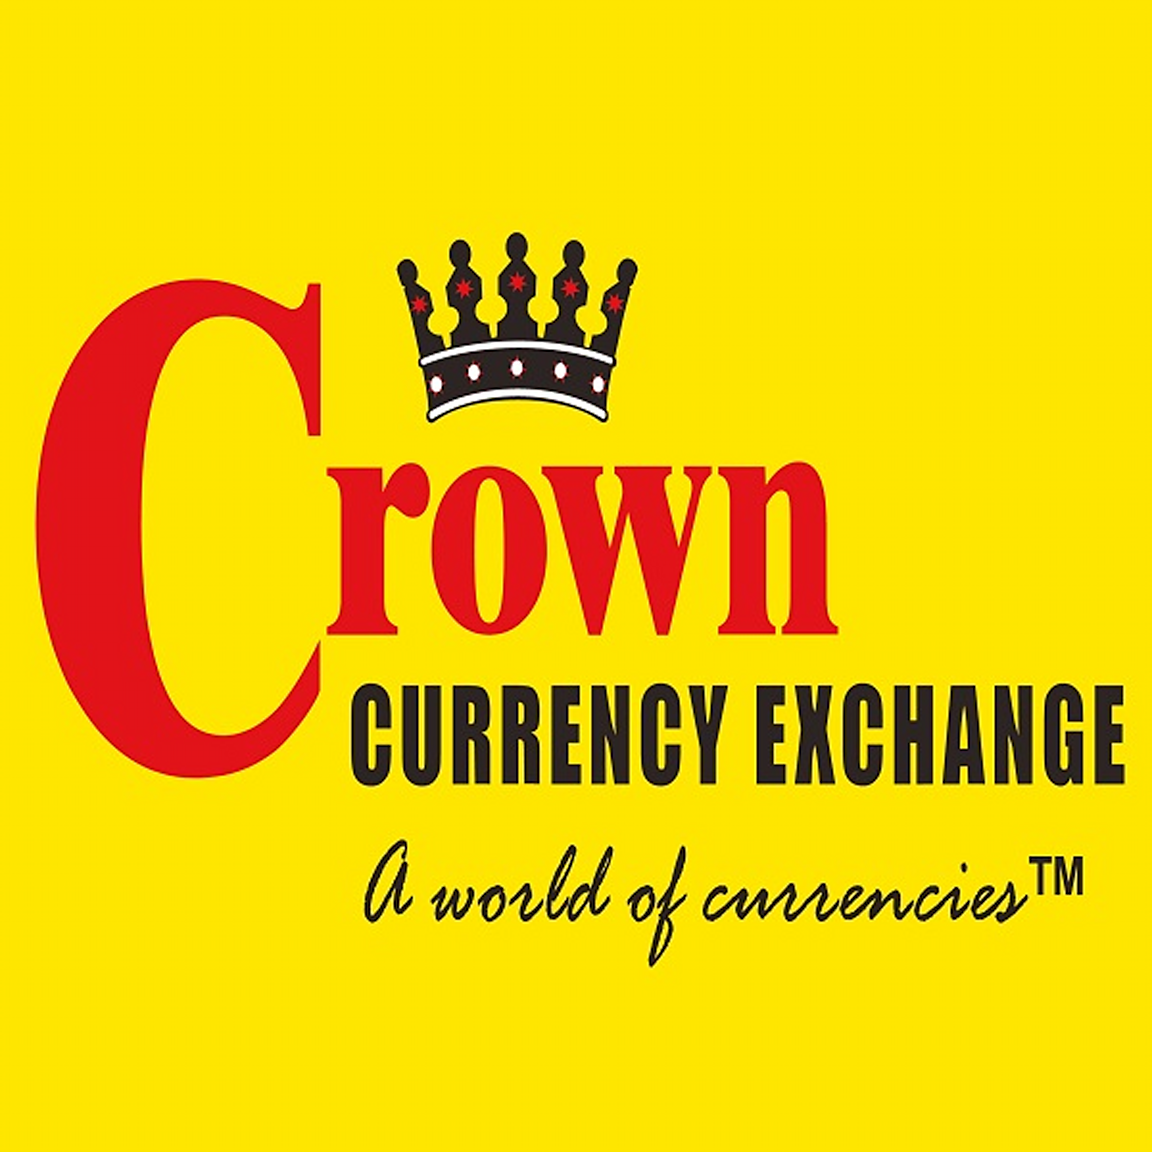 crown-currency-exchange-logo